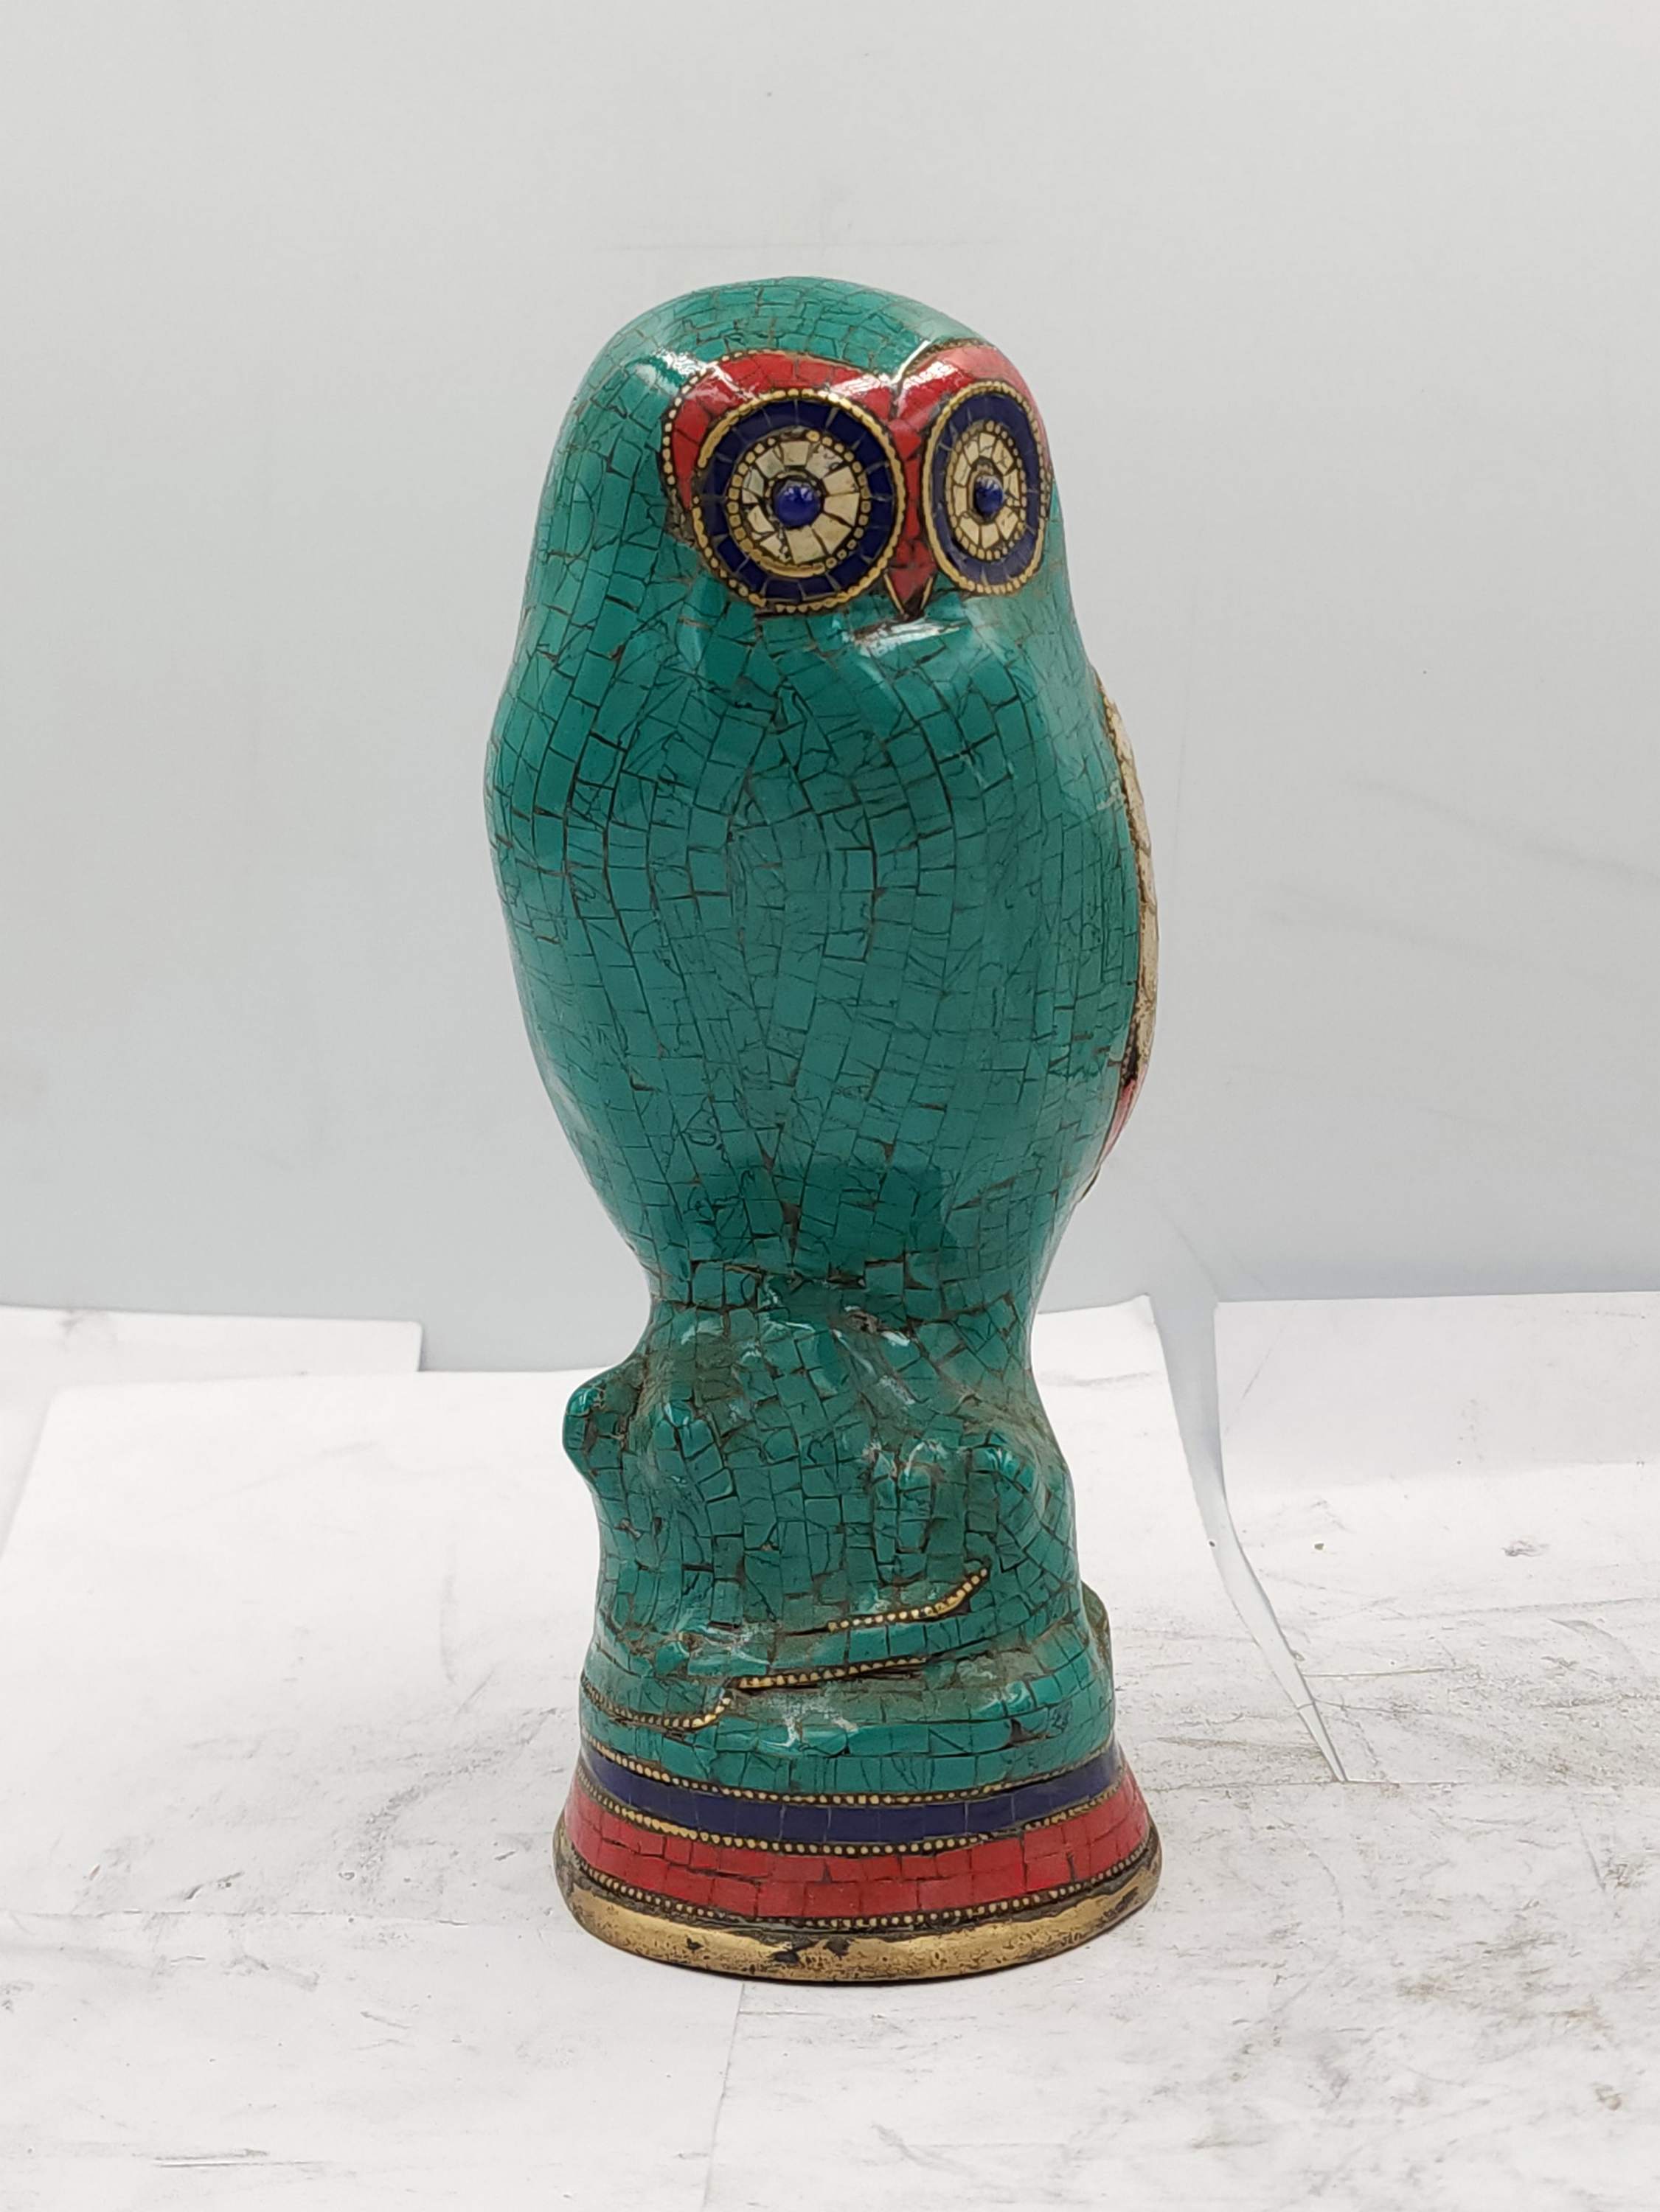 Statue Of Owl, sand Casting, stone Setting